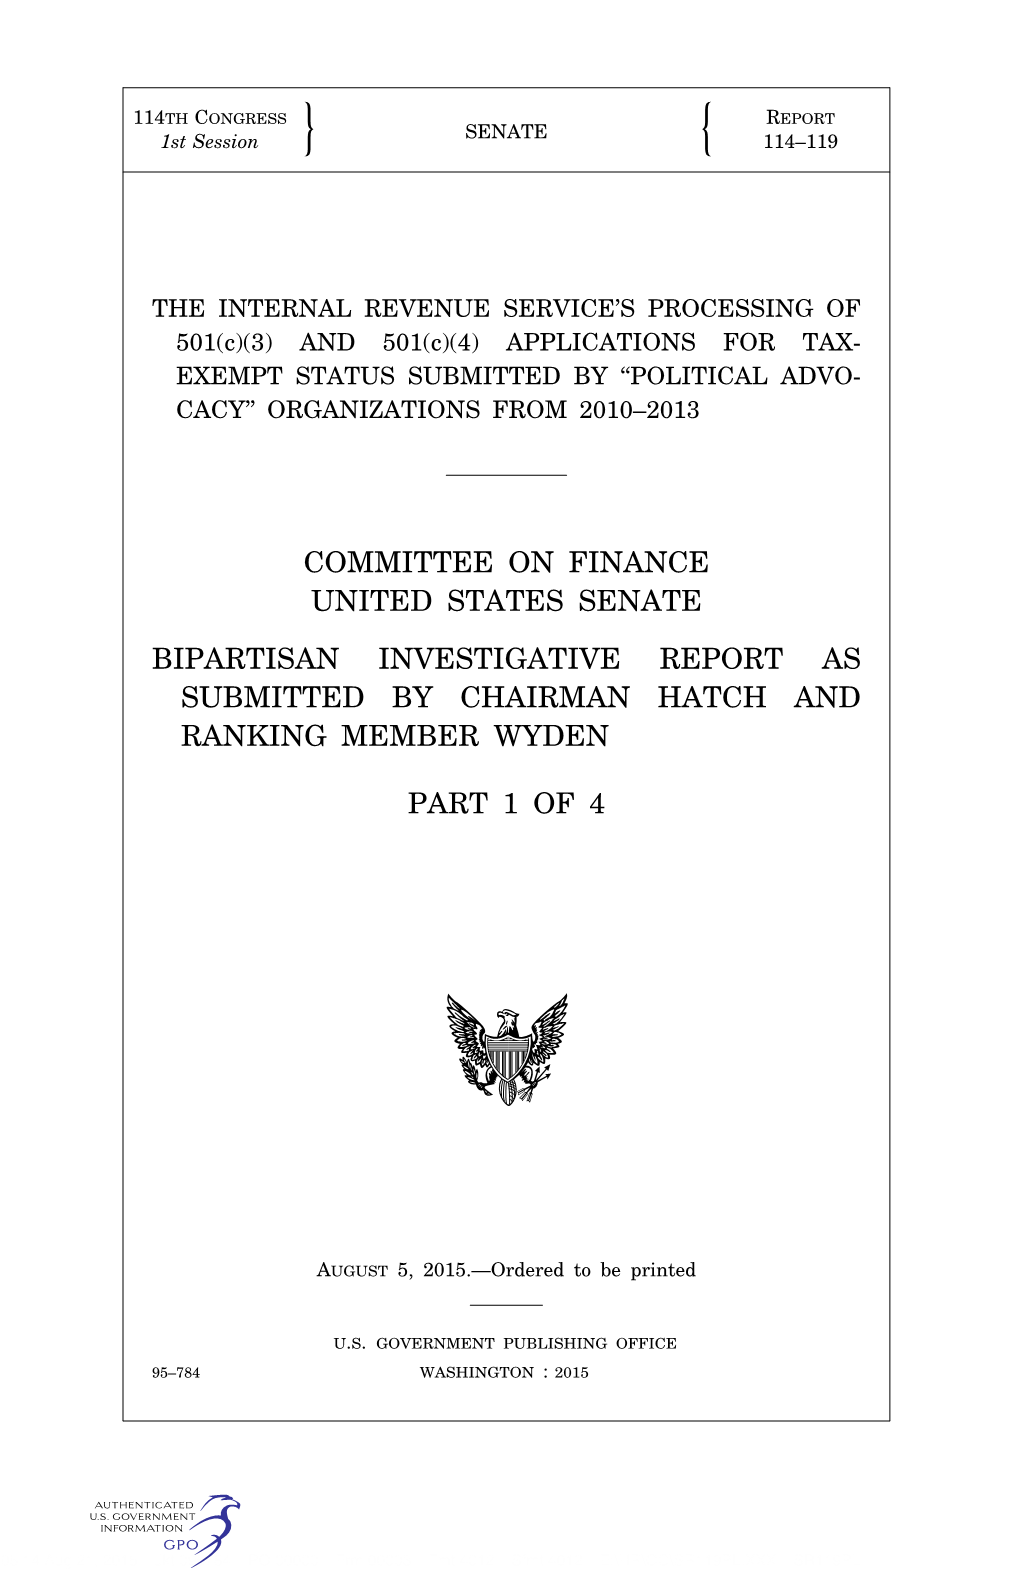 Committee on Finance United States Senate Bipartisan Investigative Report As Submitted by Chairman Hatch and Ranking Member Wyden